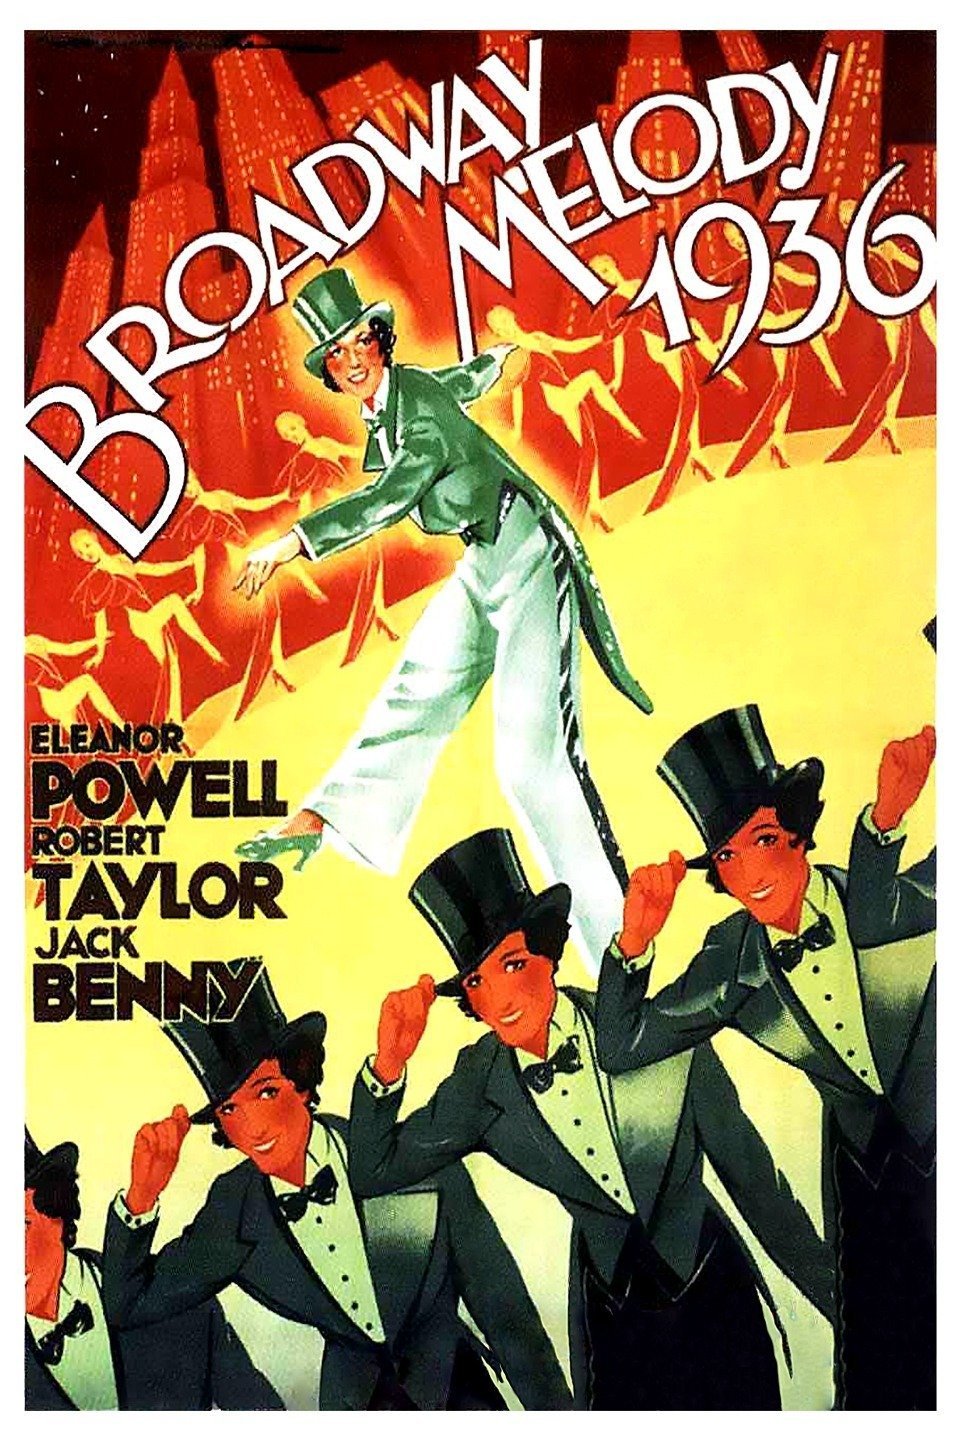 Poster of the movie Broadway Melody of 1936